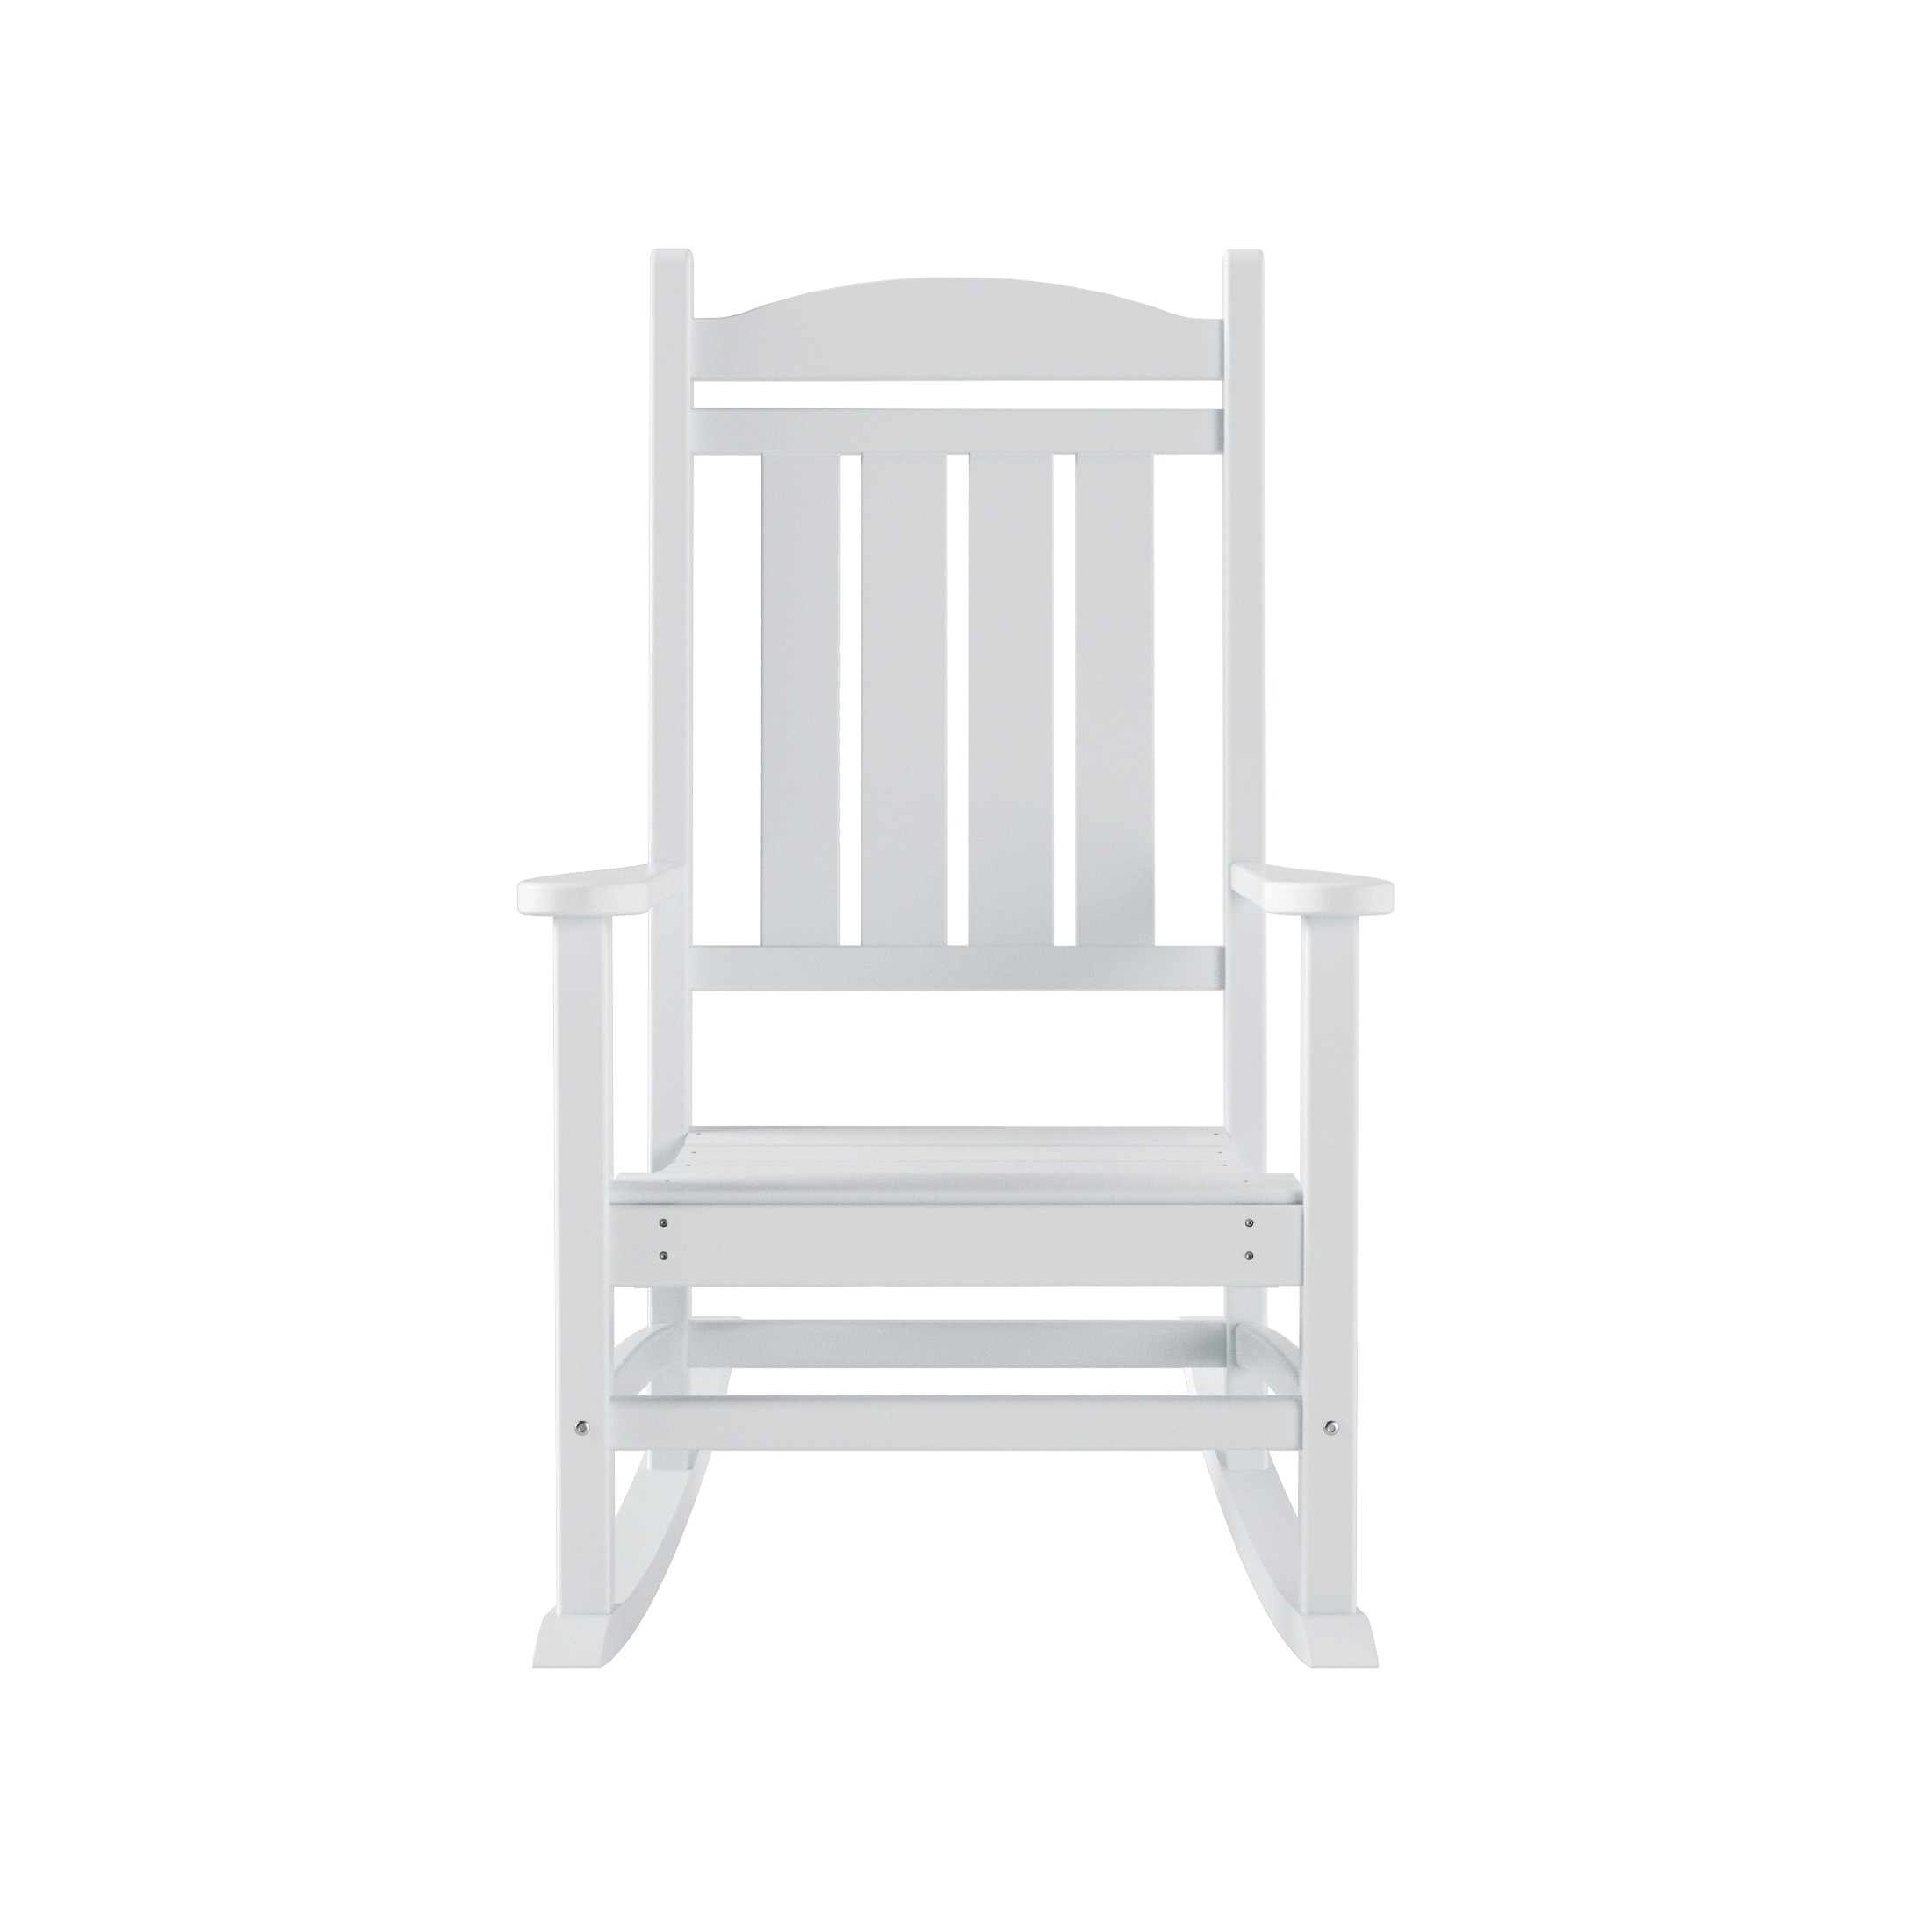 GARDEN 2-Piece Set Classic Plastic Porch Rocking Chair with Round Side Table Included, White - image 5 of 8